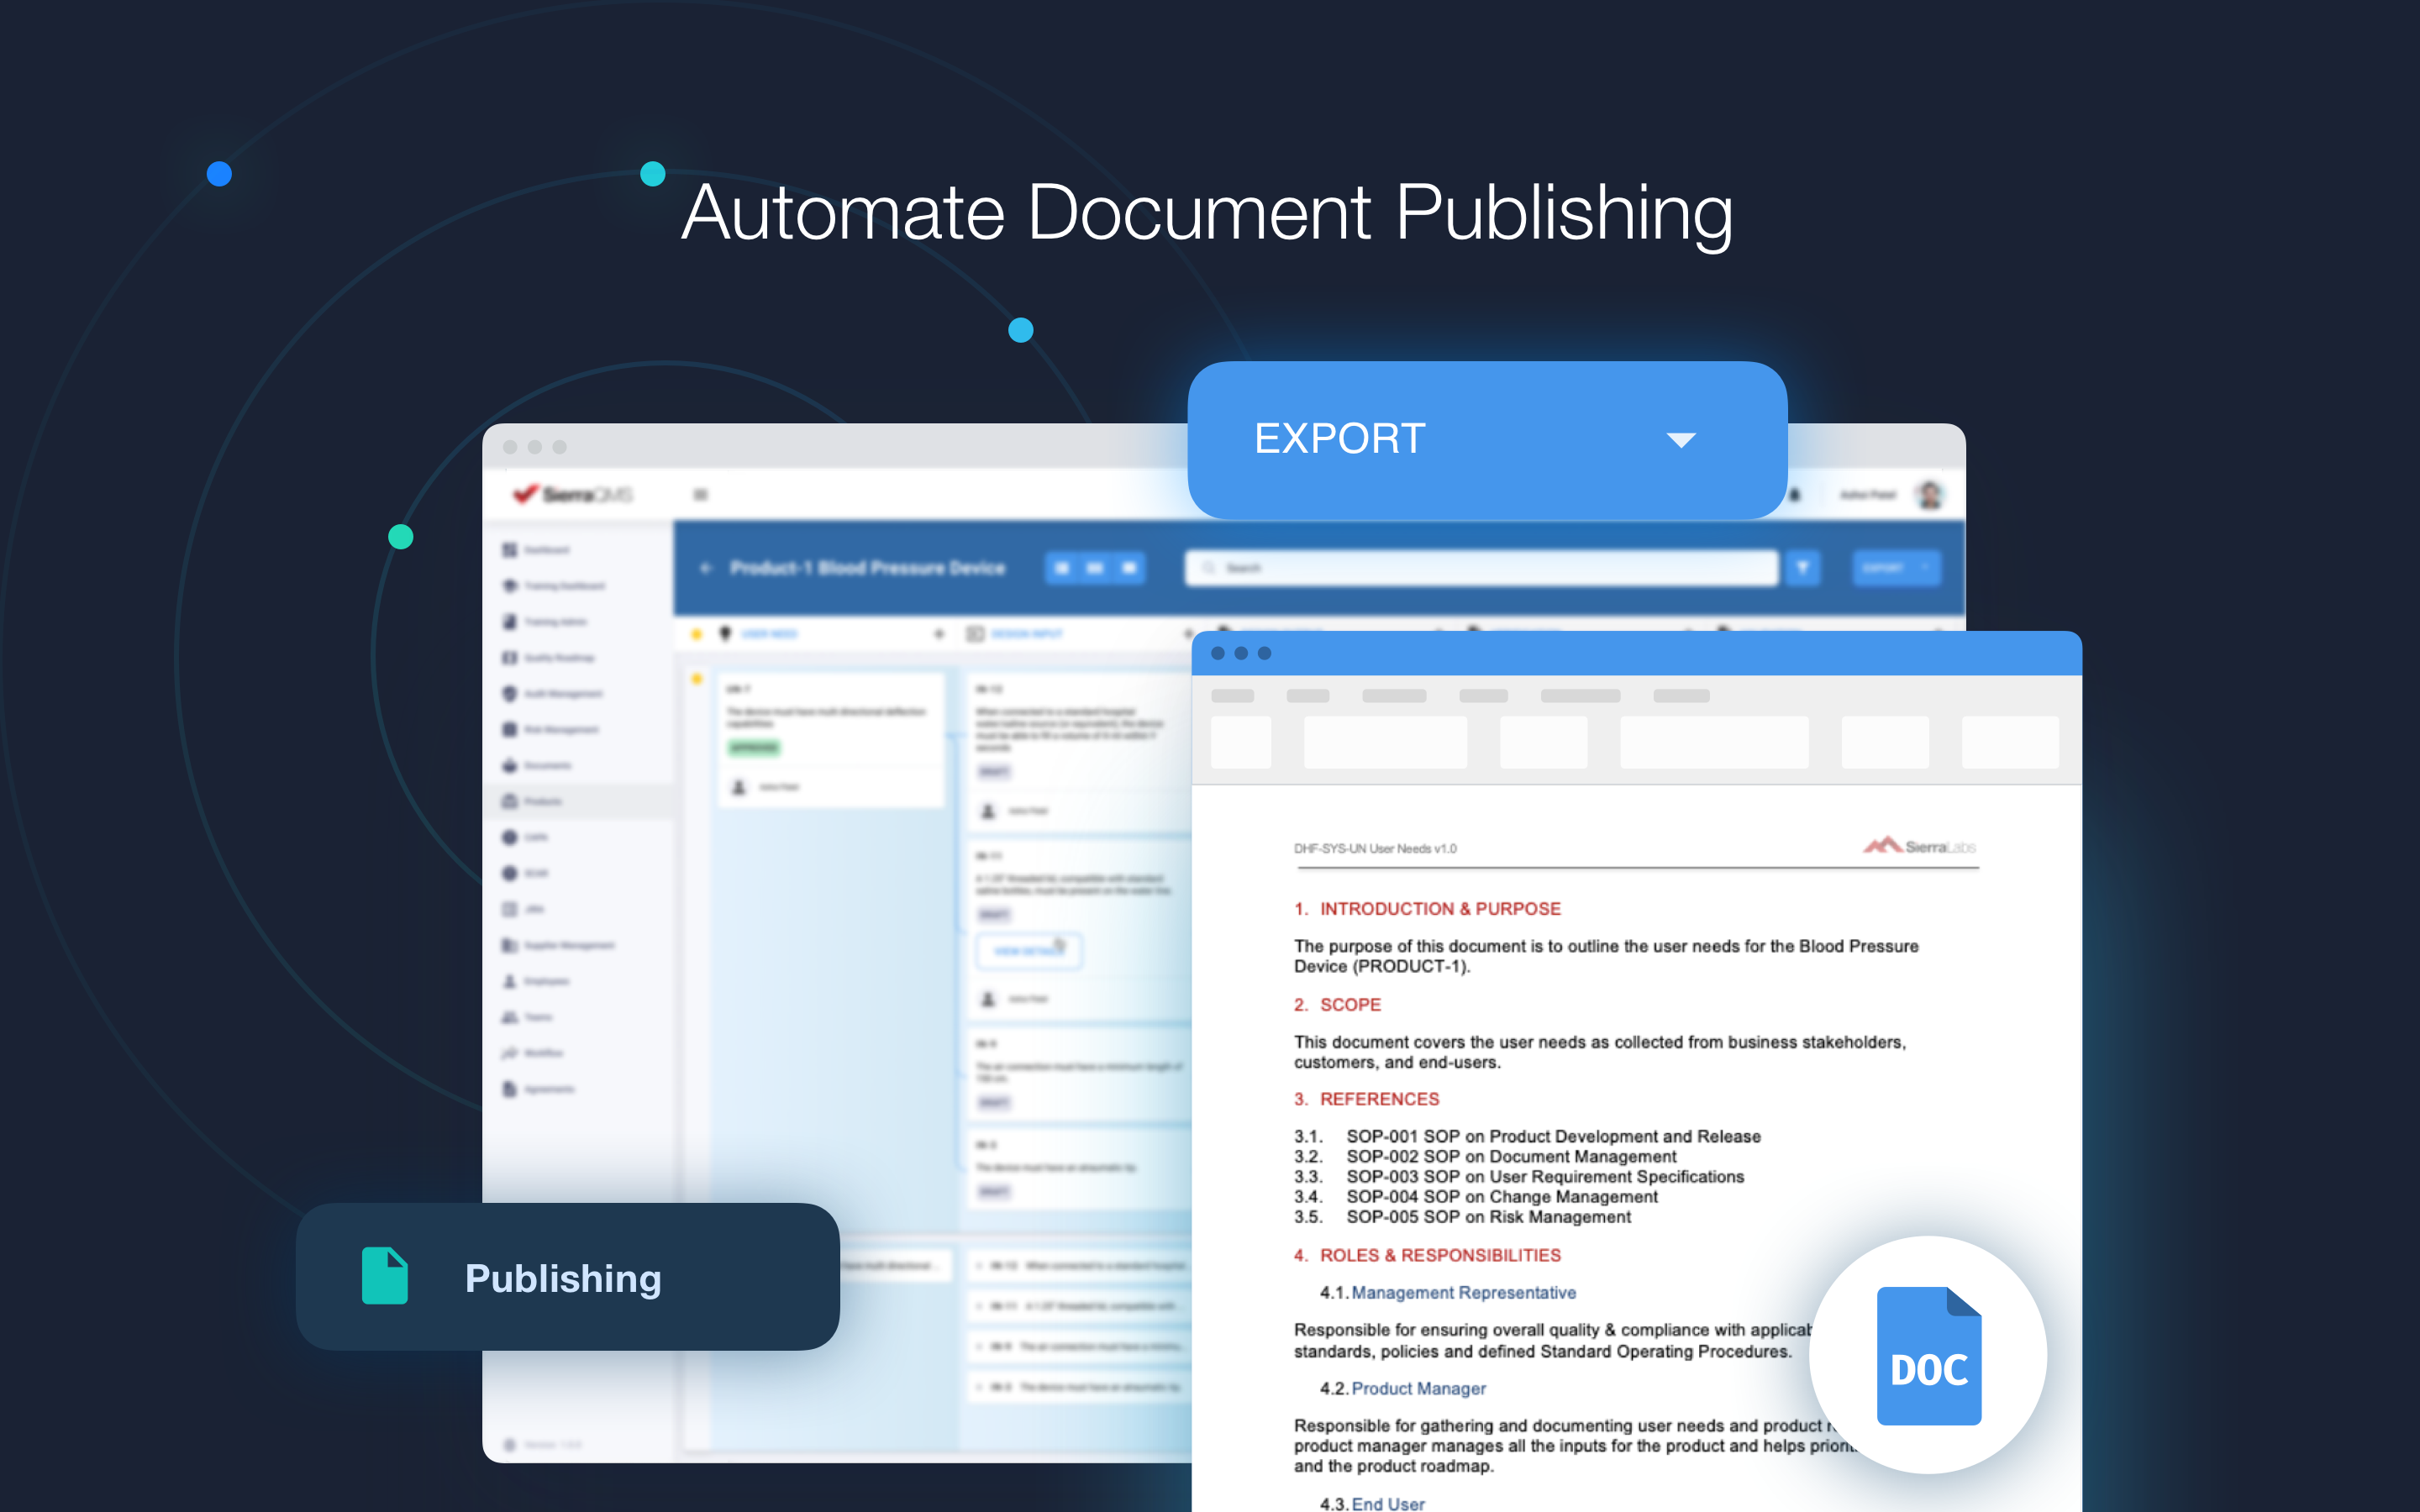 Sierra QMS Software - Publish documents for your audits, inspections, and submissions in a matter of seconds. Sierra QMS allows you to publish information from your QMS into templatized documents to share with regulatory bodies.